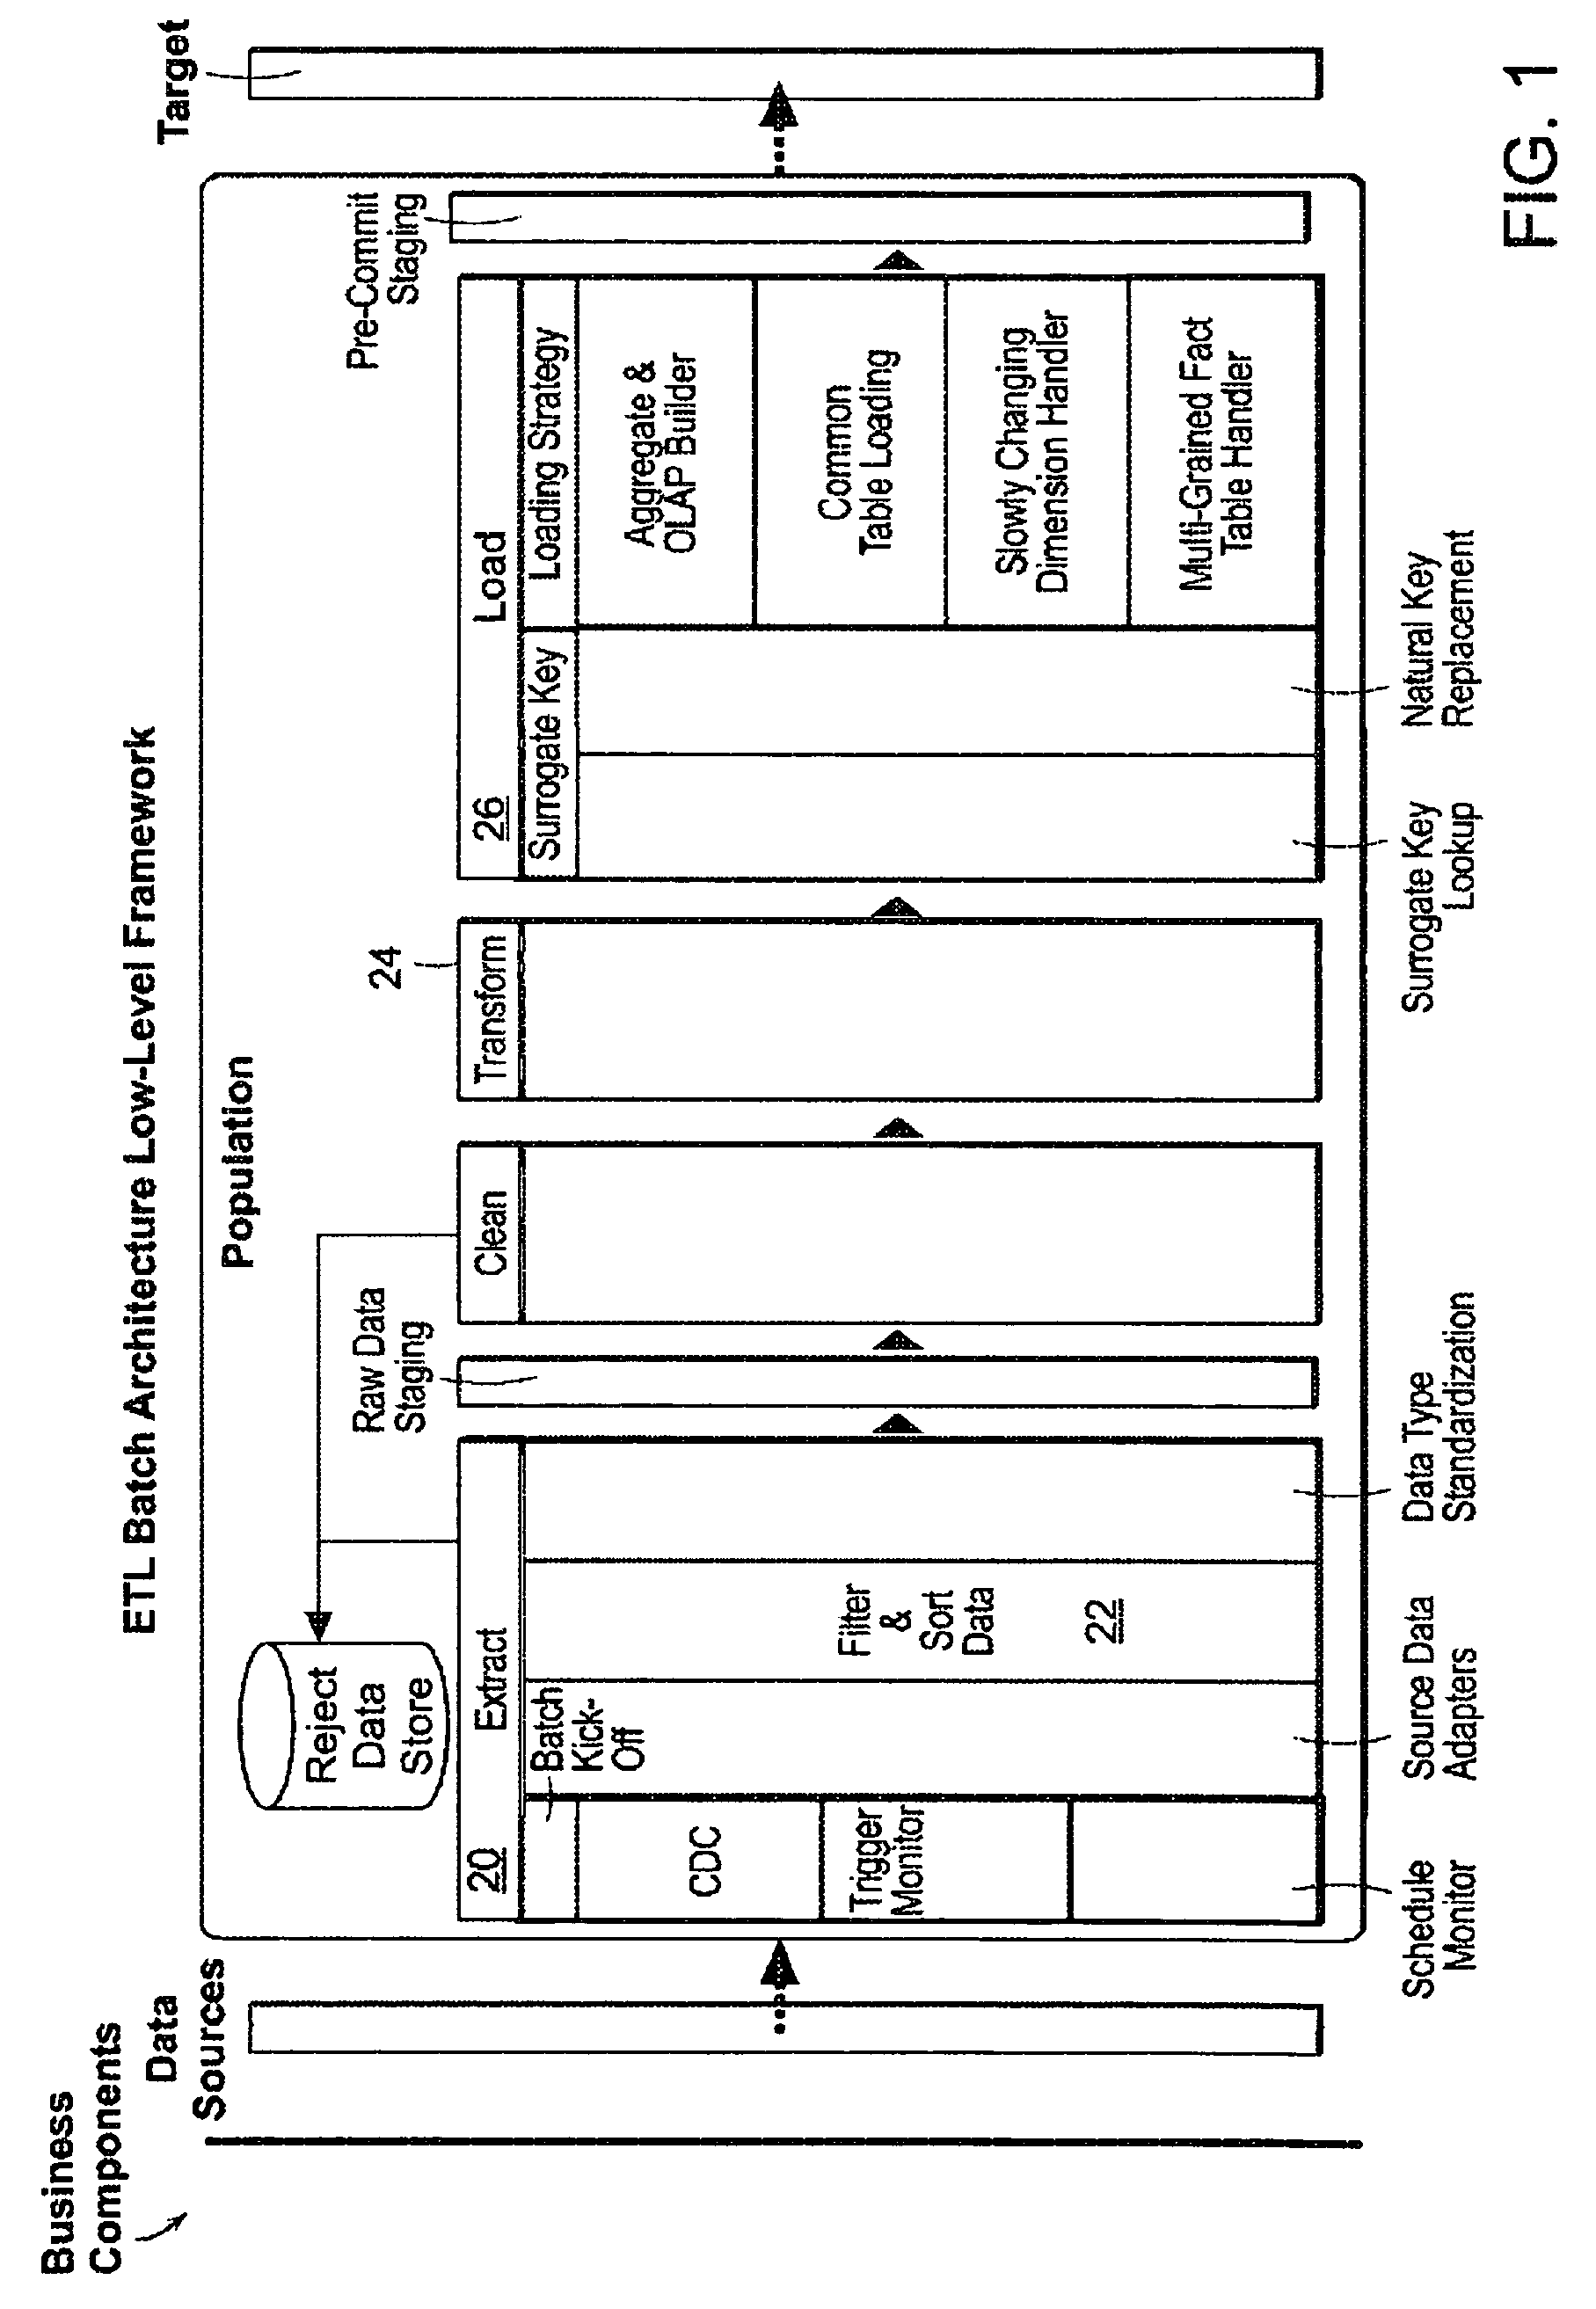 System and method for automating ETL applications